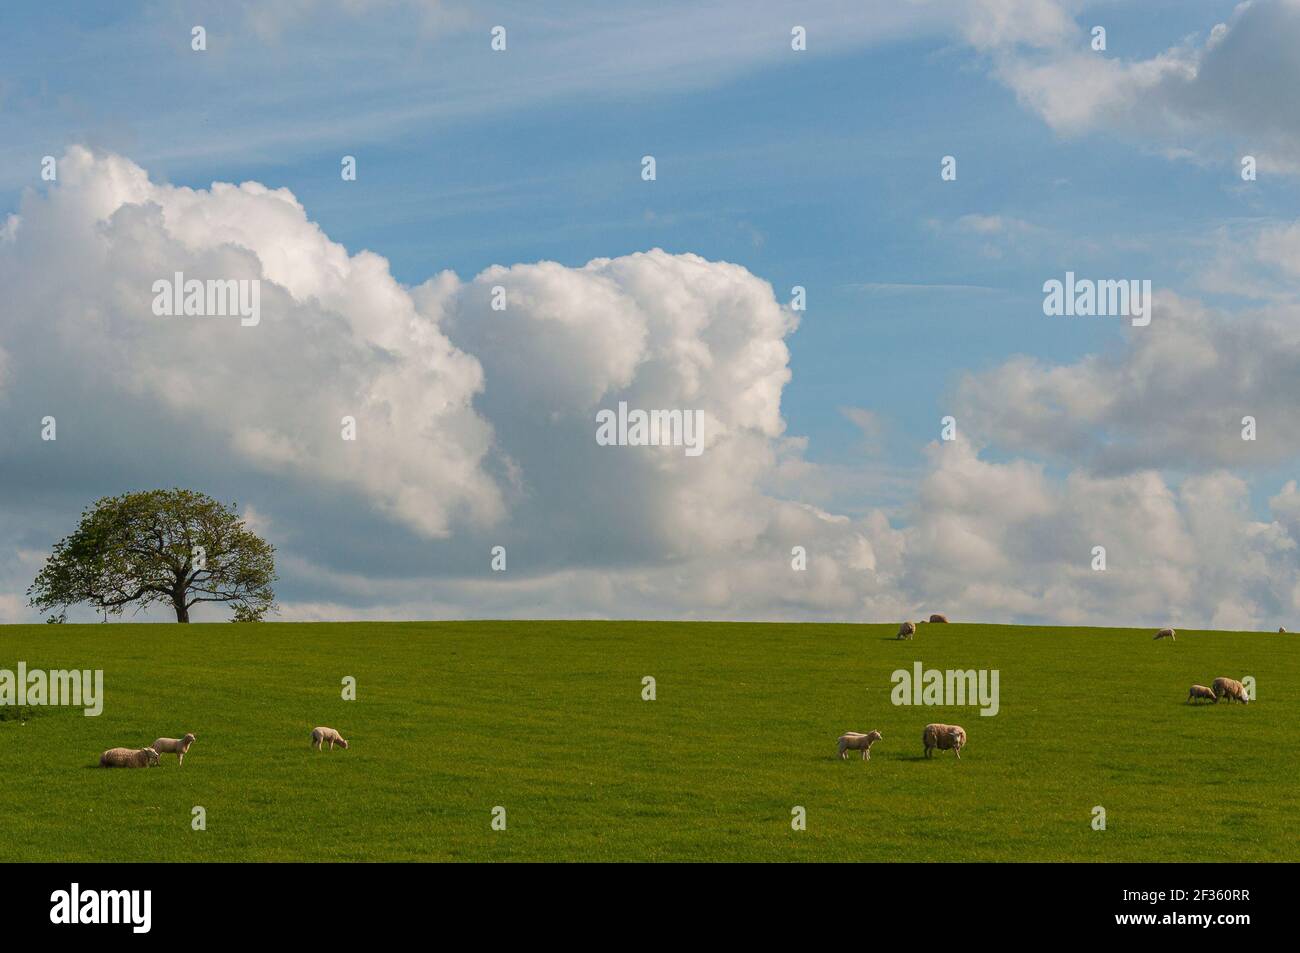 Flock of grazing sheep on a meadow with solitary tree in the background, Scotland. Concept: animal life, national symbol, life on farms, wool producti Stock Photo